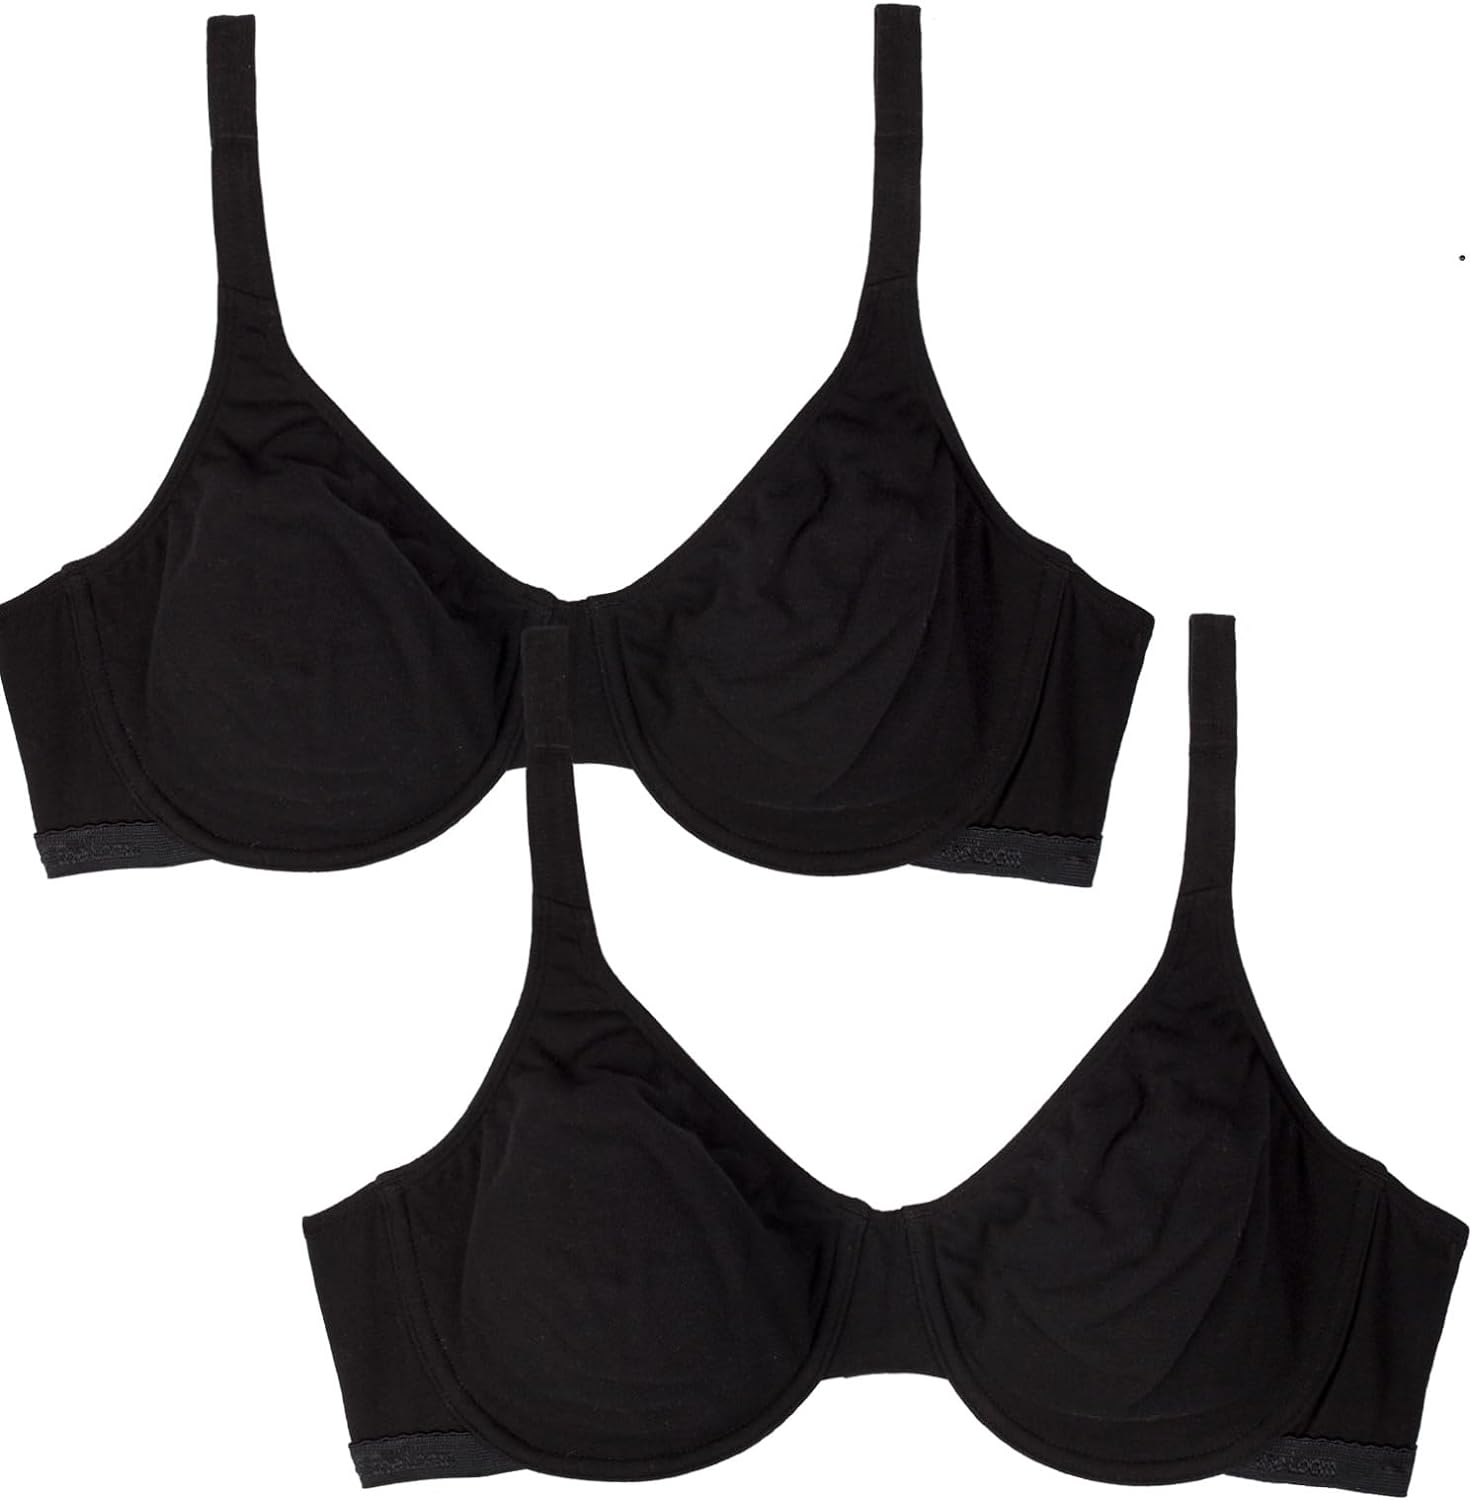 Fruit of the Loom Women's Cotton Stretch Extreme Comfort Bra Set 